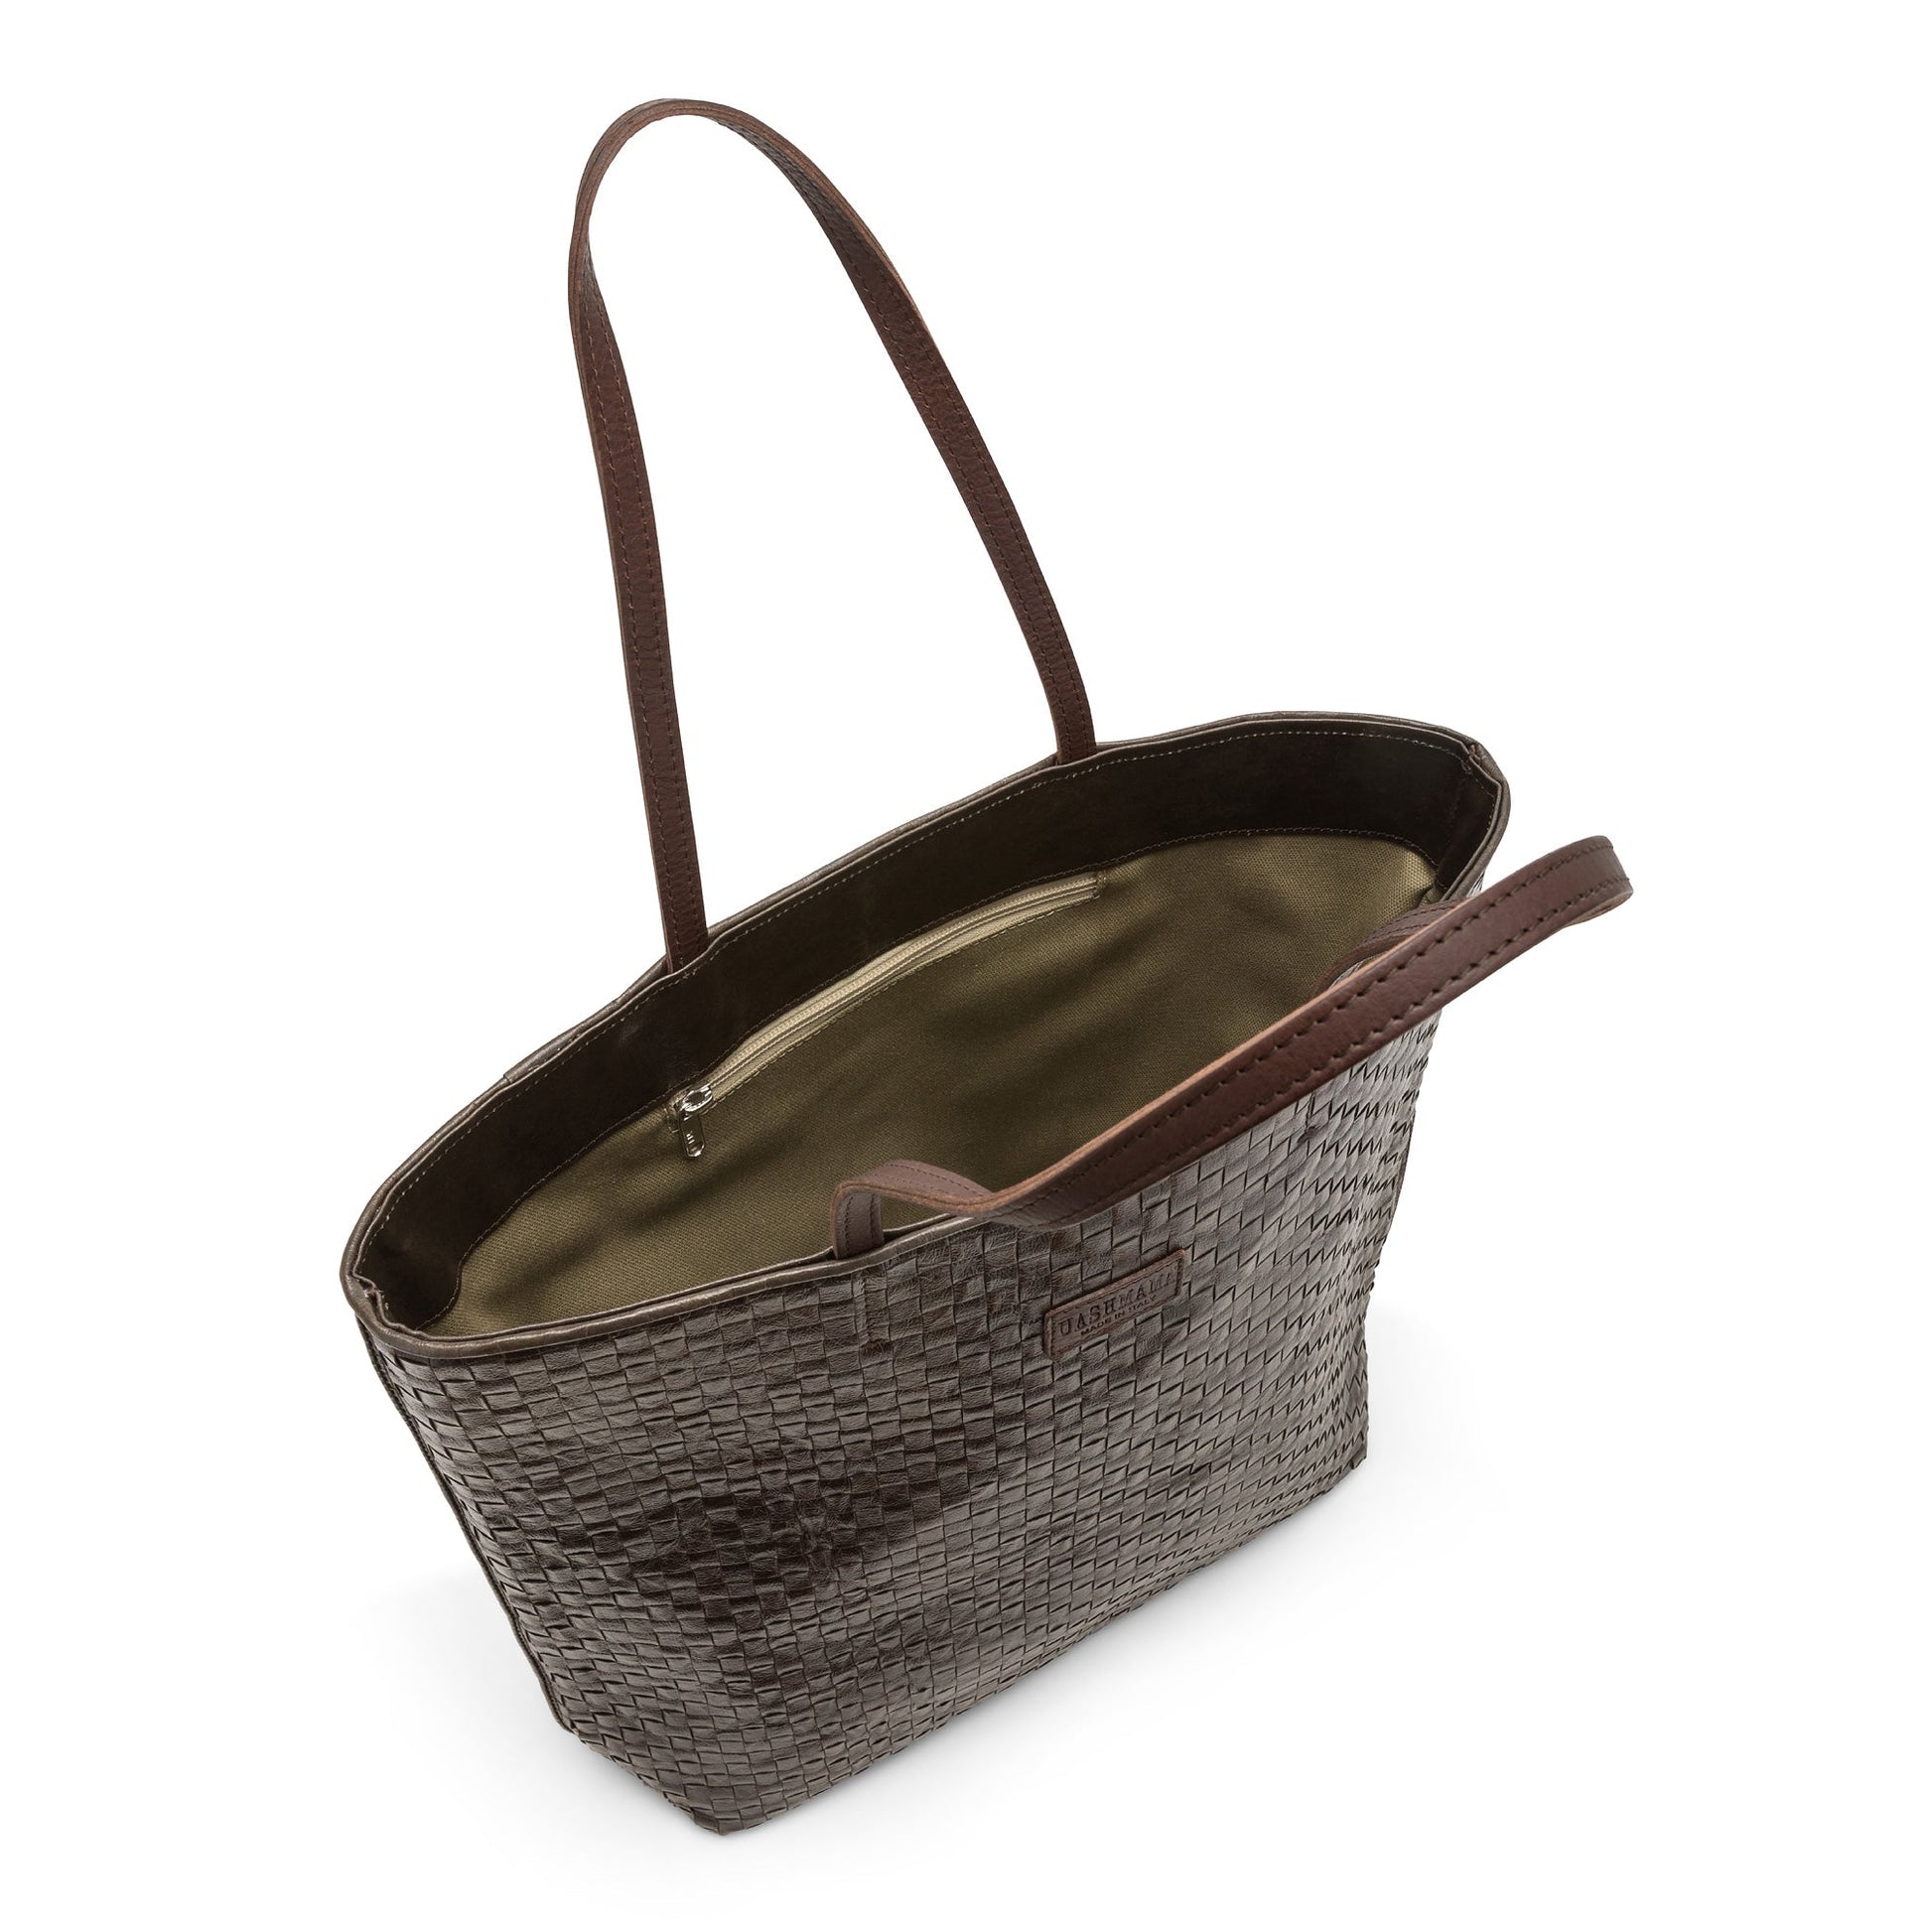 A brown woven washable paper tote bag with leather handles and a leather UASHMAMA logo label is shown open. The image shows an organic cotton lining and an internal zipped pocket.